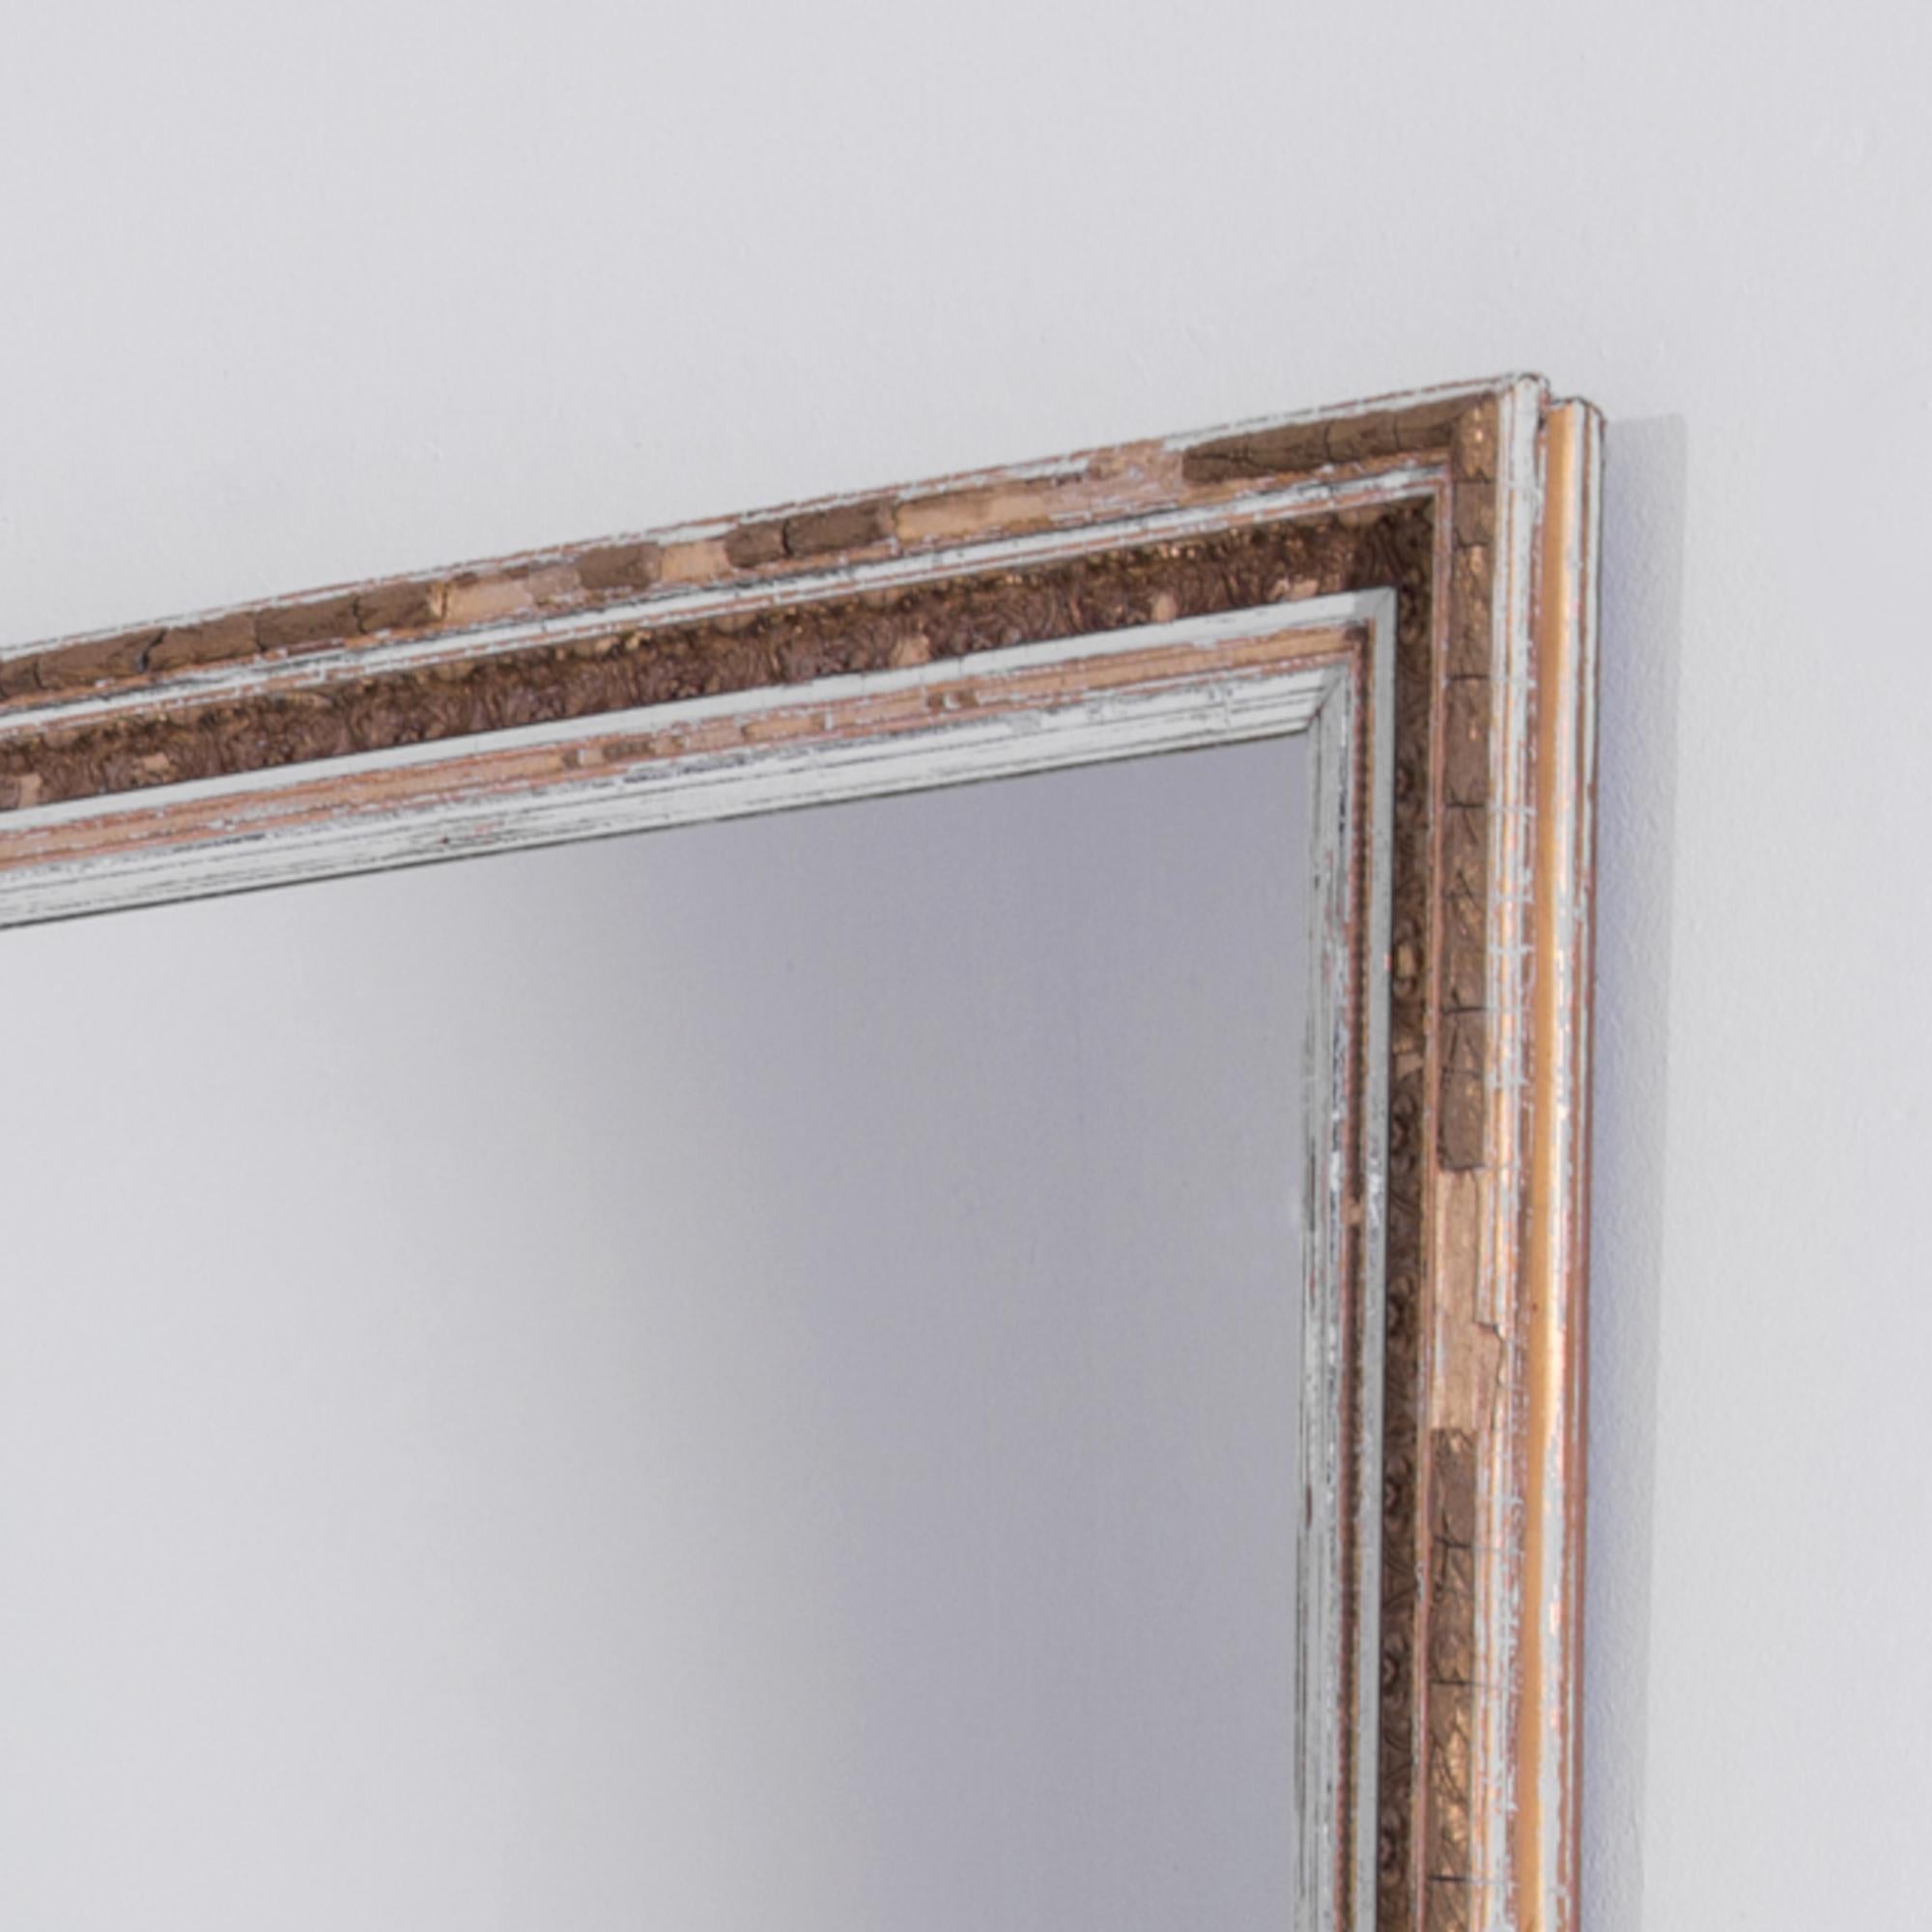 A wooden mirror crafted in France circa 1880. The white patinated frame is enlivened with an exquisite ornamentation. Three by three and a half feet, this antique looking glass resembles a window to the epoch of the 19th century bourgeois refinement.